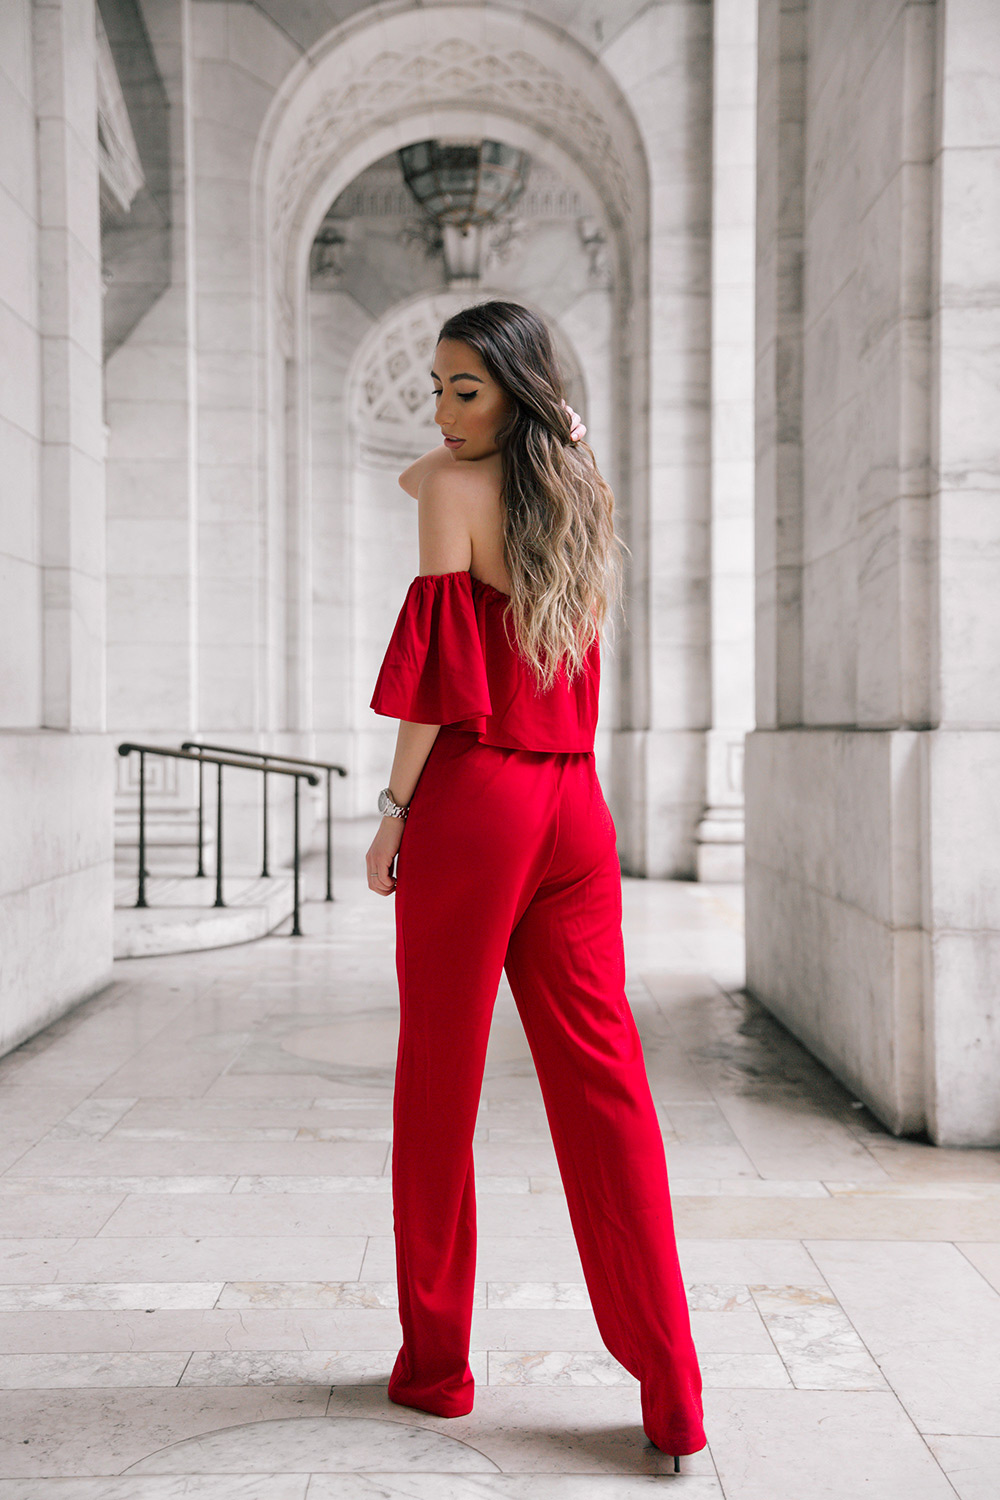 Charlie Utility Jumpsuit in Rosewood – Marine Layer